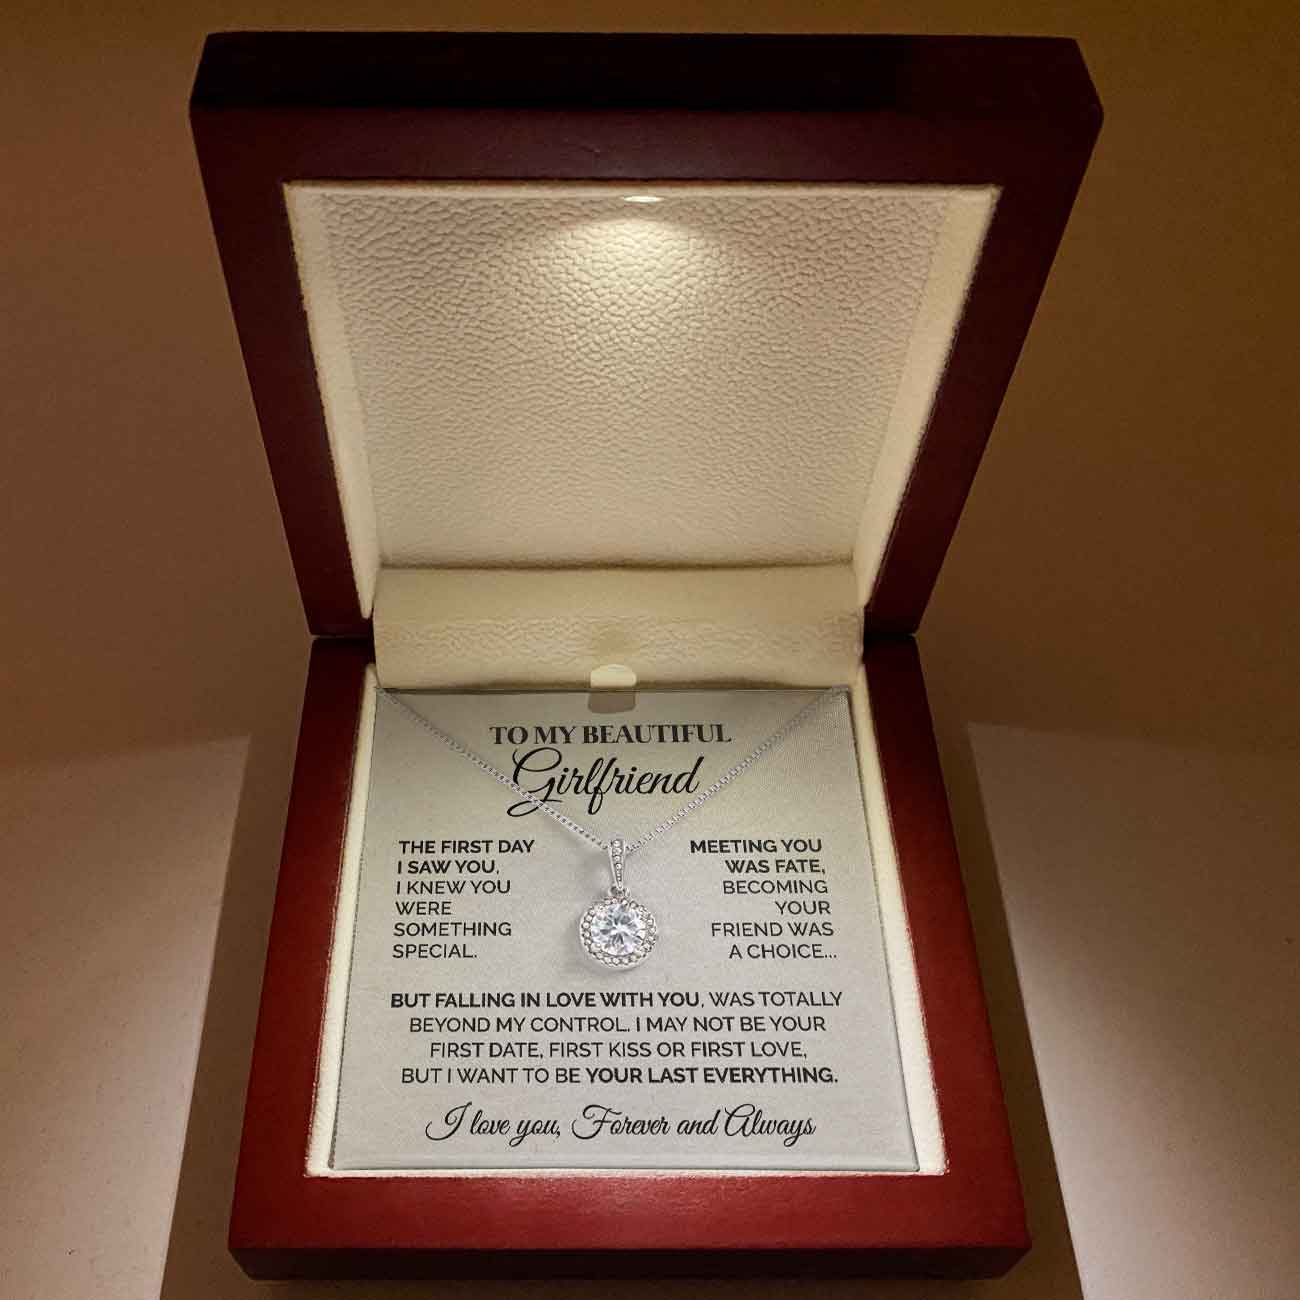 ShineOn Fulfillment Jewelry Mahogany Style Luxury Box To My Beautiful Girlfriend - The First Day I Saw You - Eternal Hope Necklace